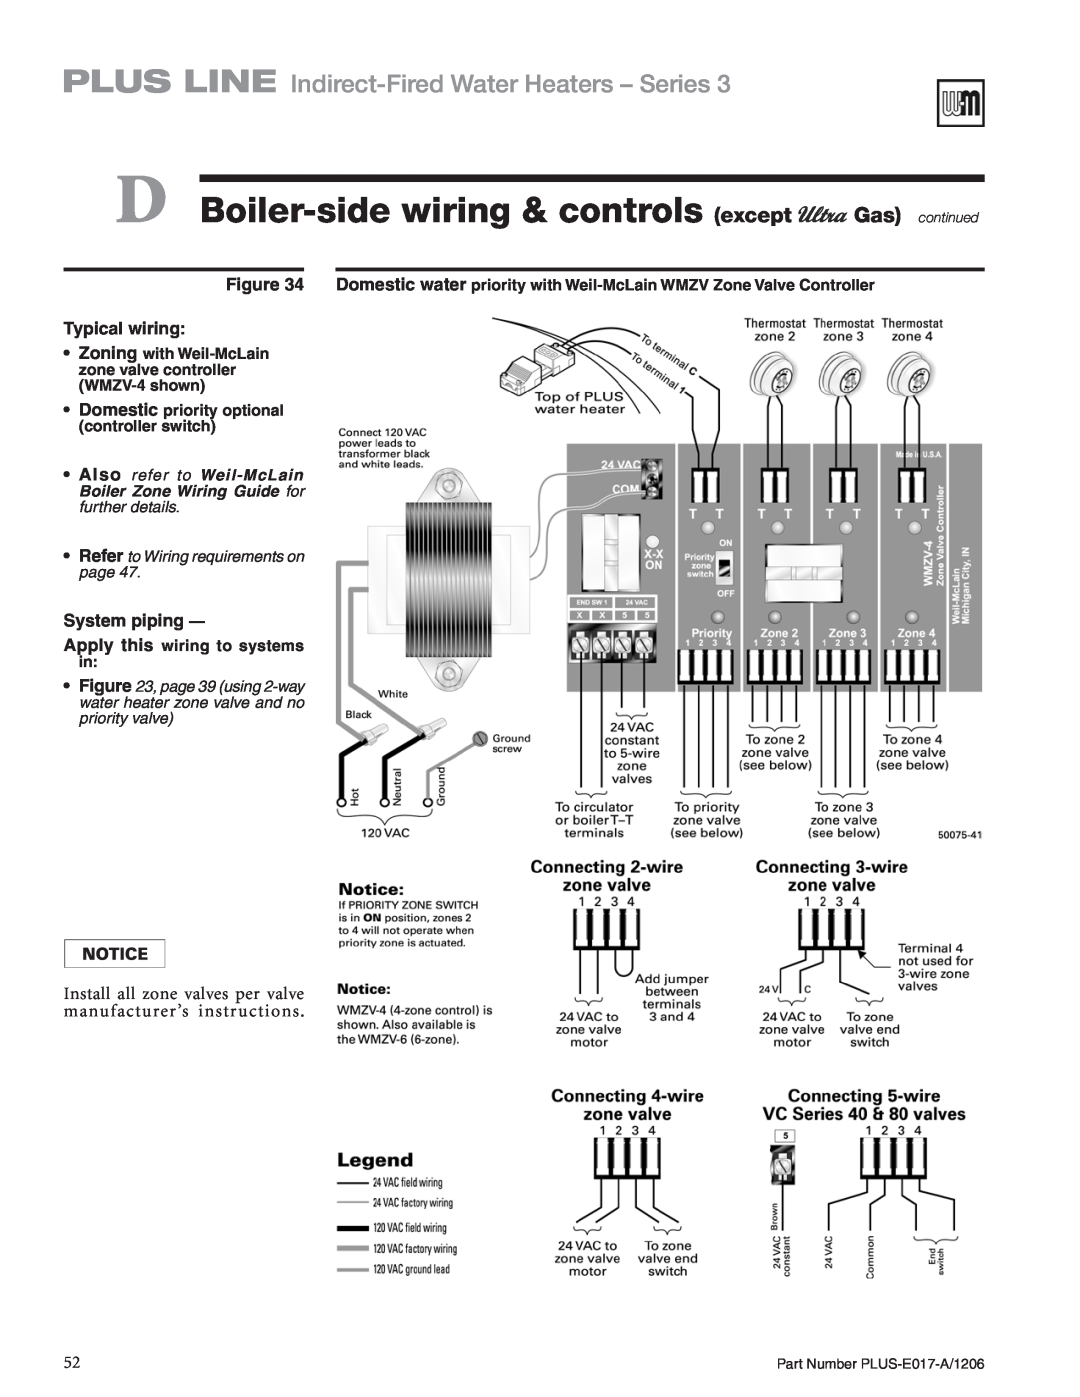 Weil-McLain PLUS-E017-A/1206 manual PLUS LINE Indirect-FiredWater Heaters - Series, Typical wiring, System piping 